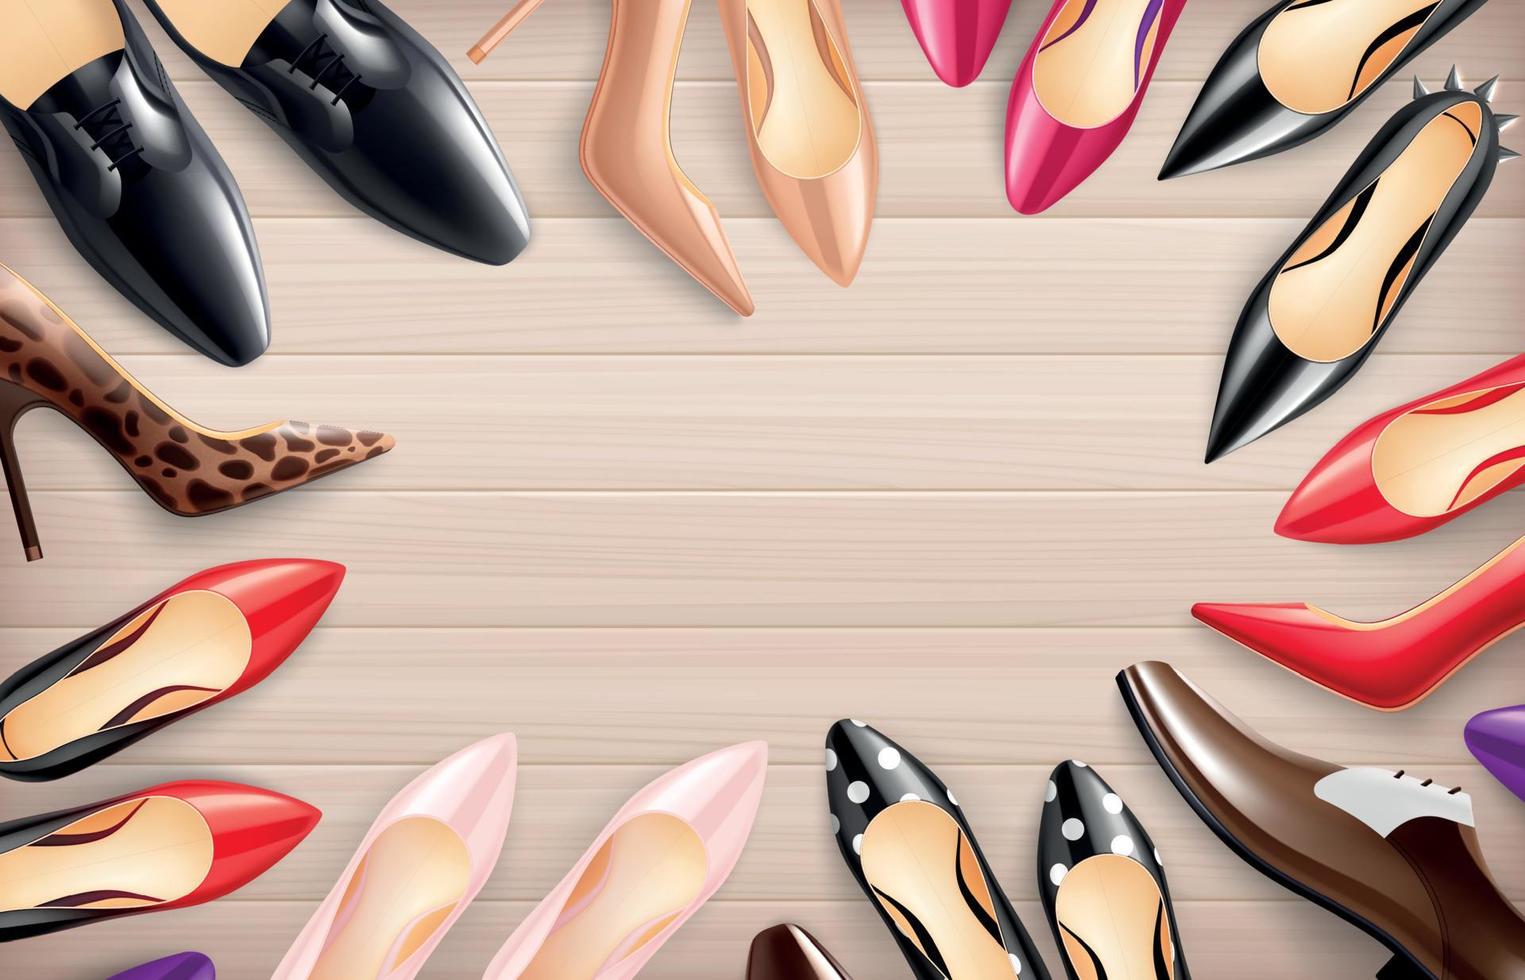 Women Shoes Realistic Background vector